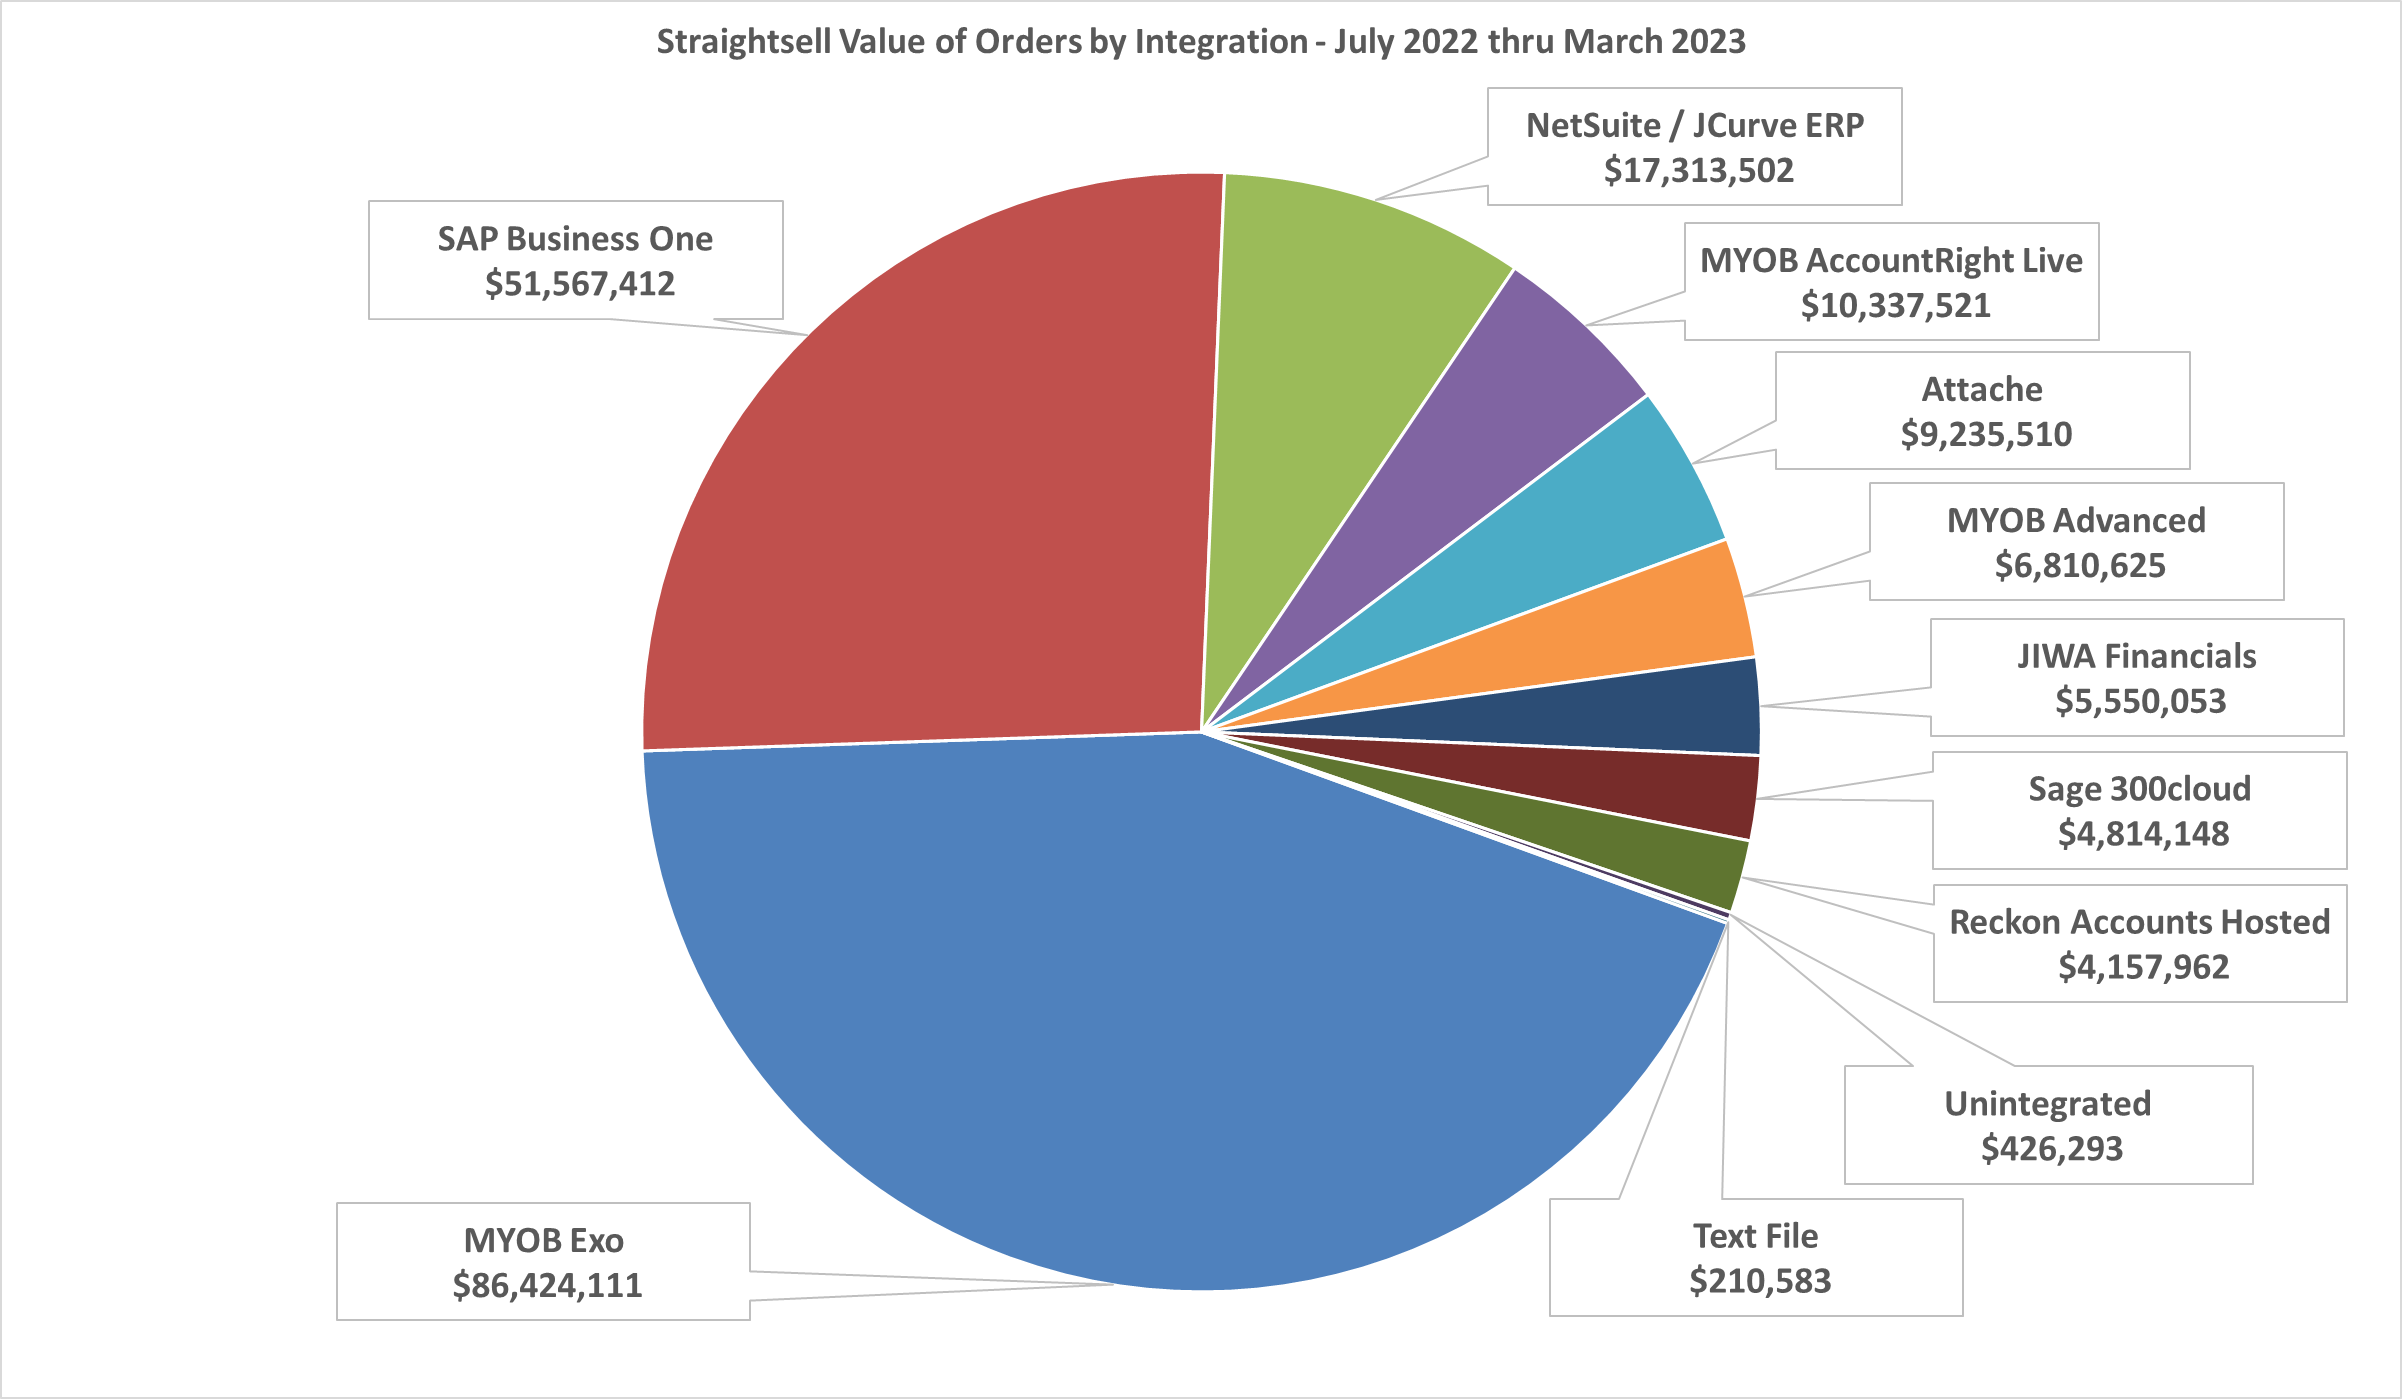 Straightsell Value of Orders by Integration - July 2022 thru March 2023